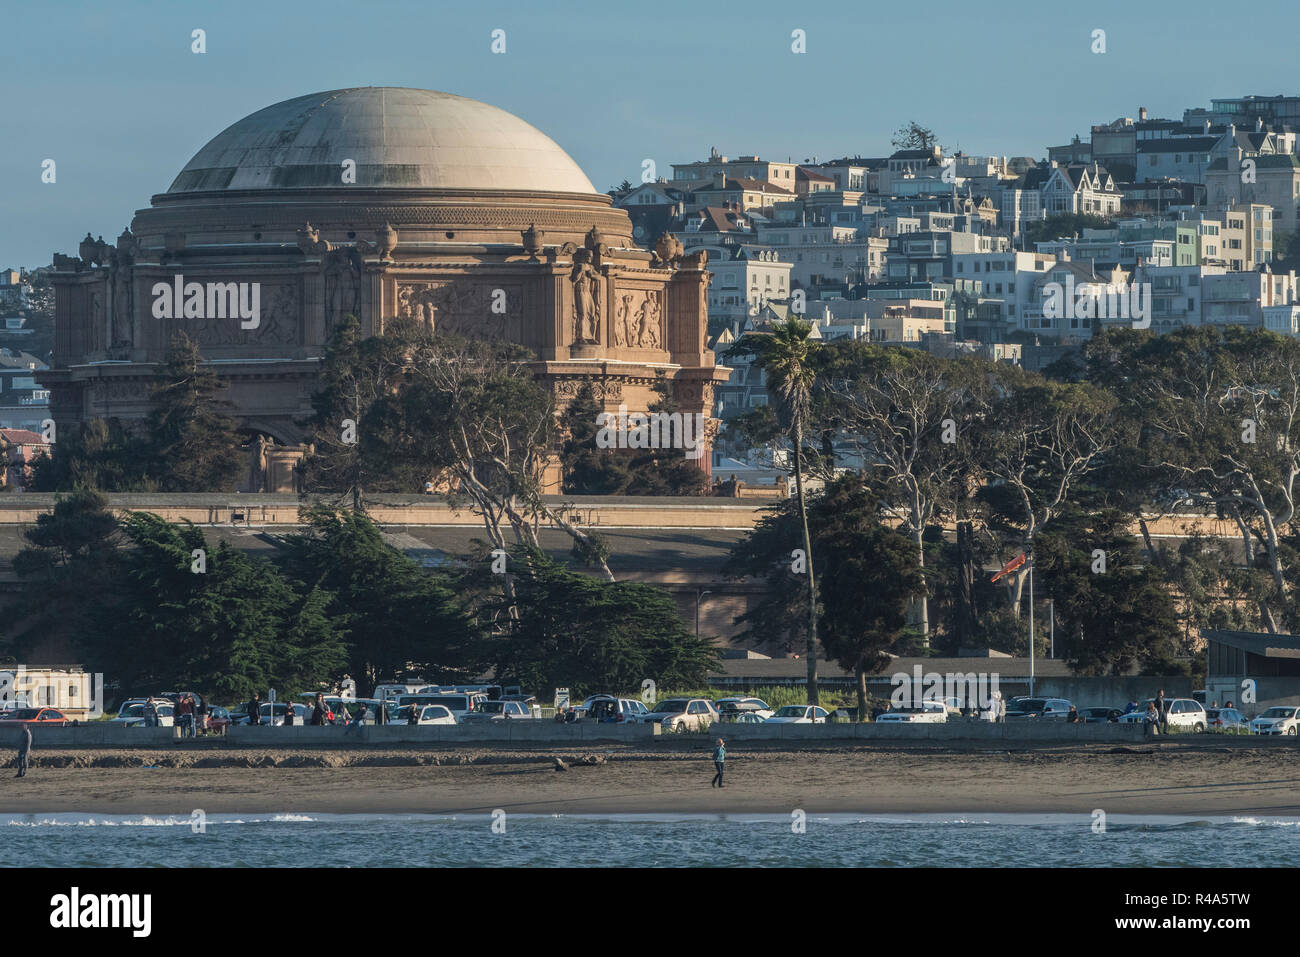 The palace of fine arts theatre in San Francisco as seen from golden gate strait from a boat. Stock Photo